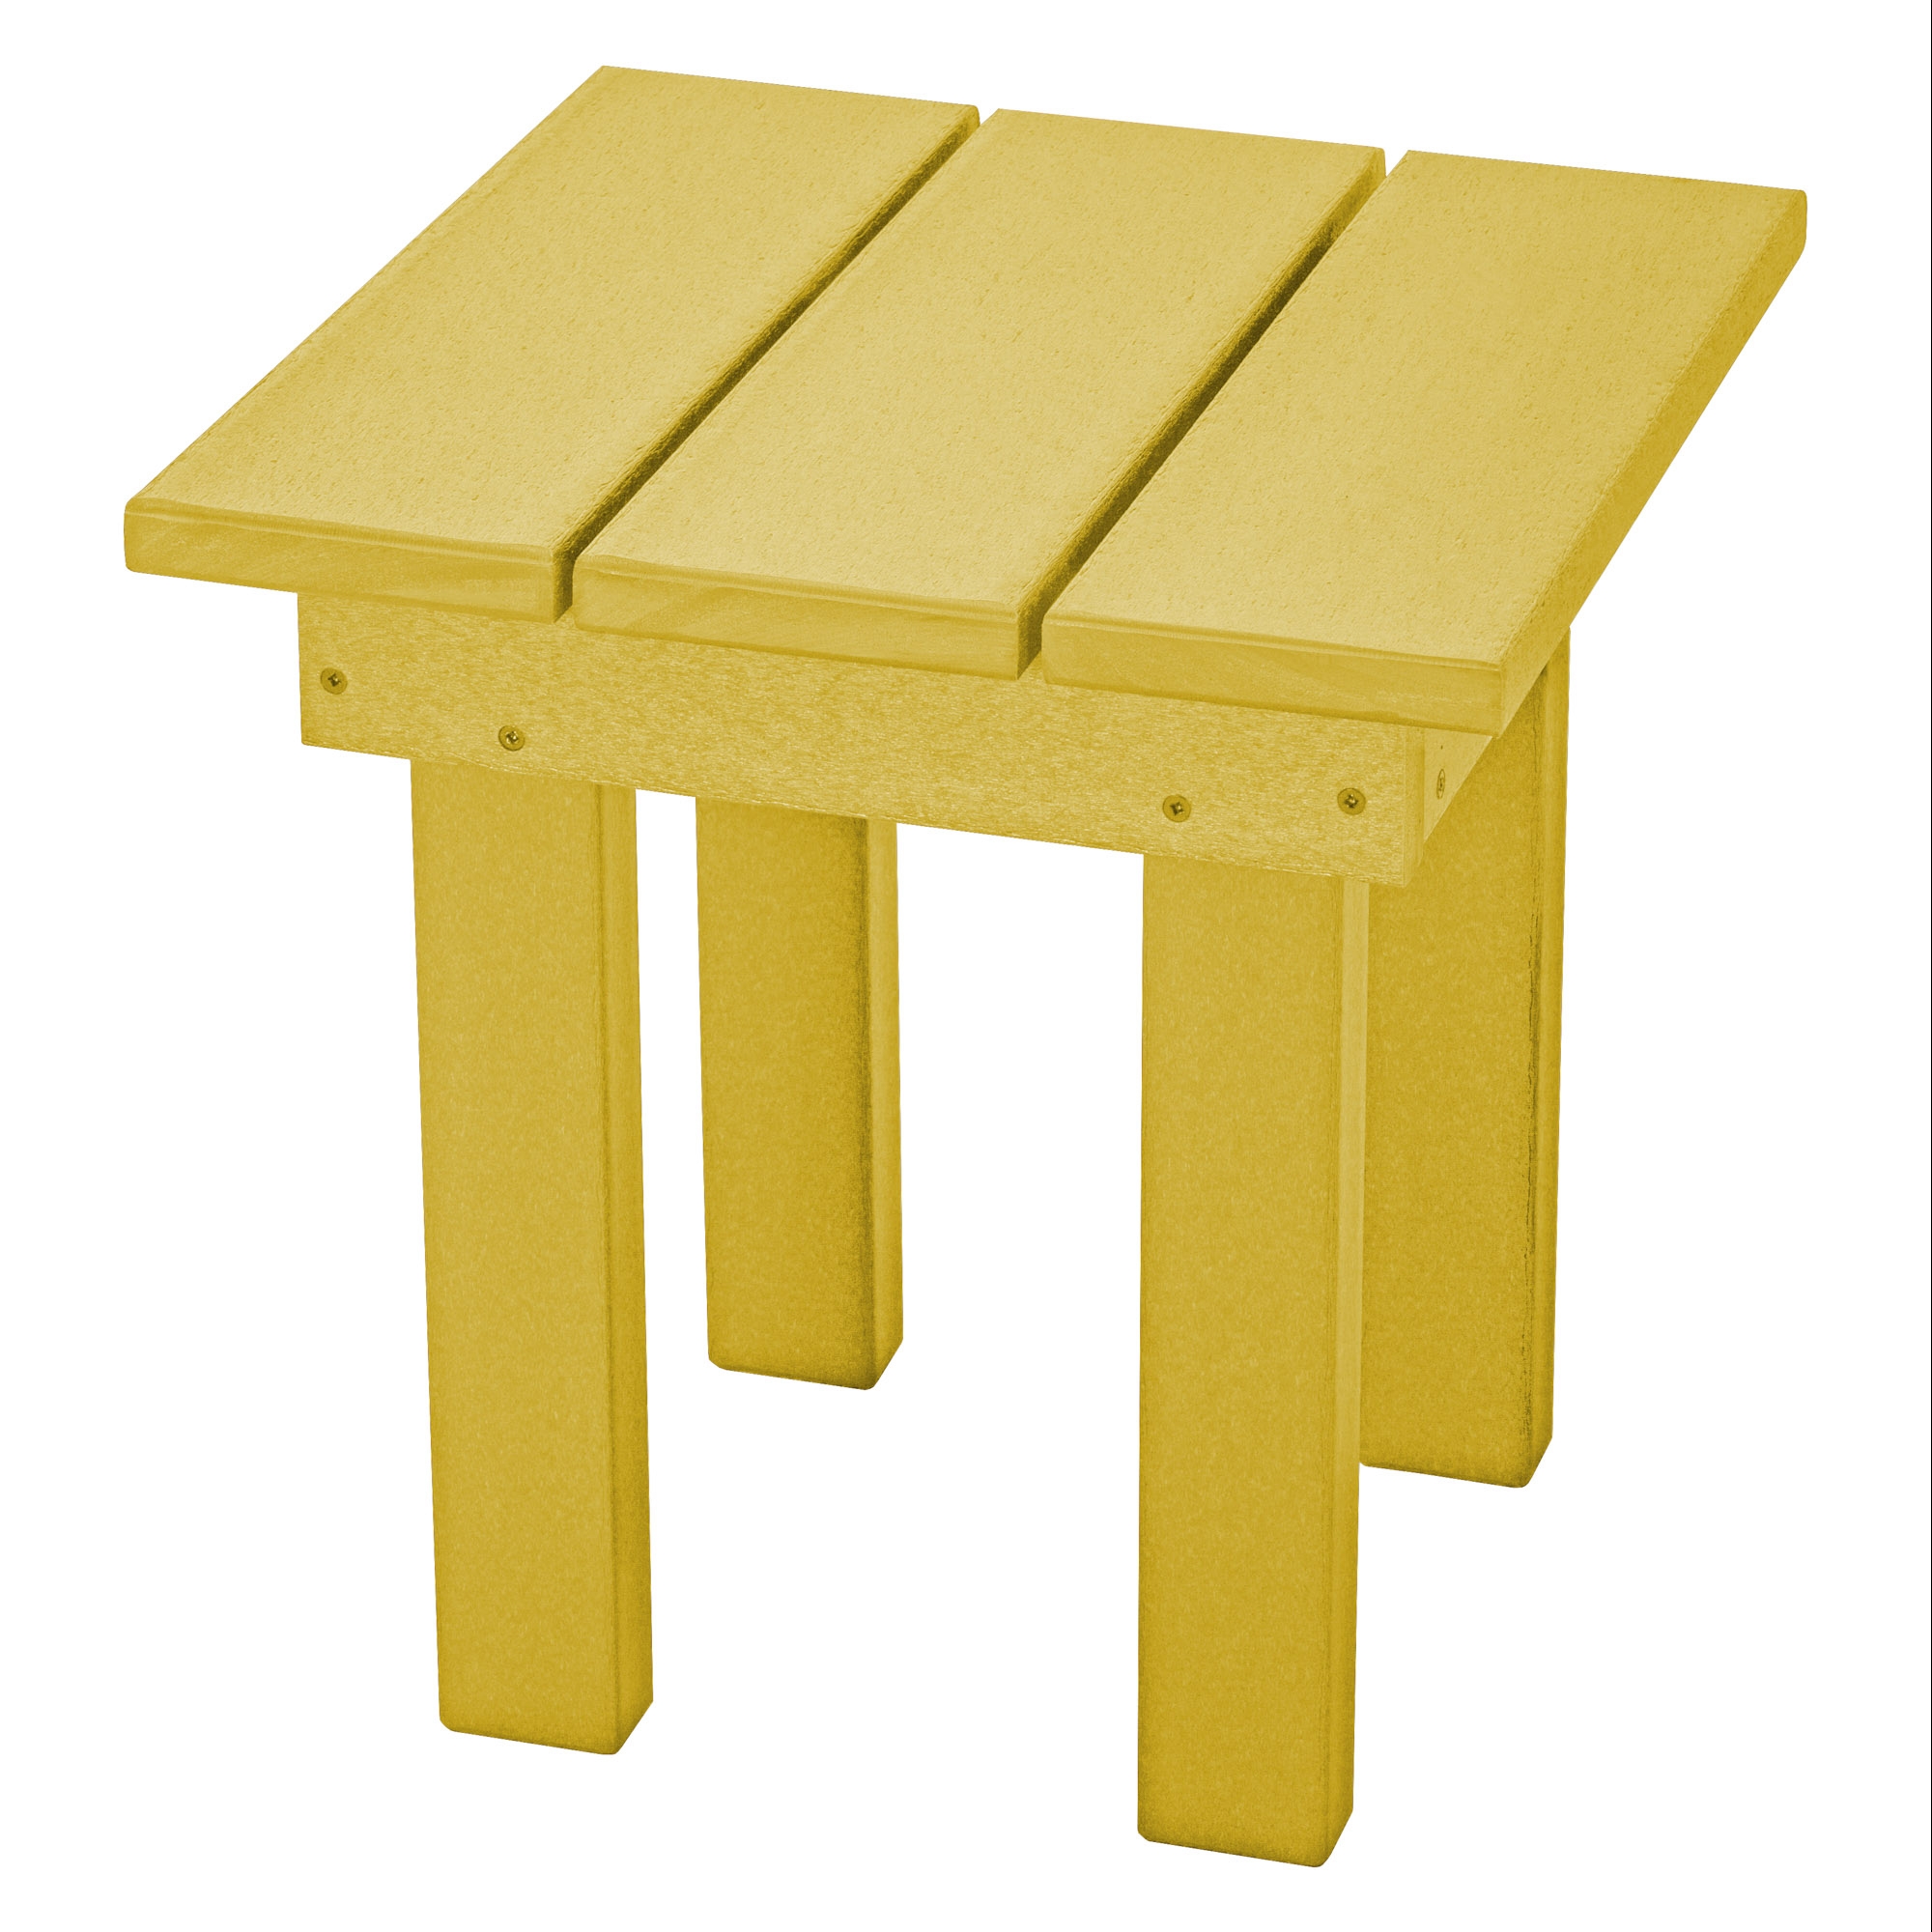 durawood square adirondack side table pawleys island hammocks small yellow outdoor accent clearance and chairs industrial look bedside tables diy patio umbrella stand white